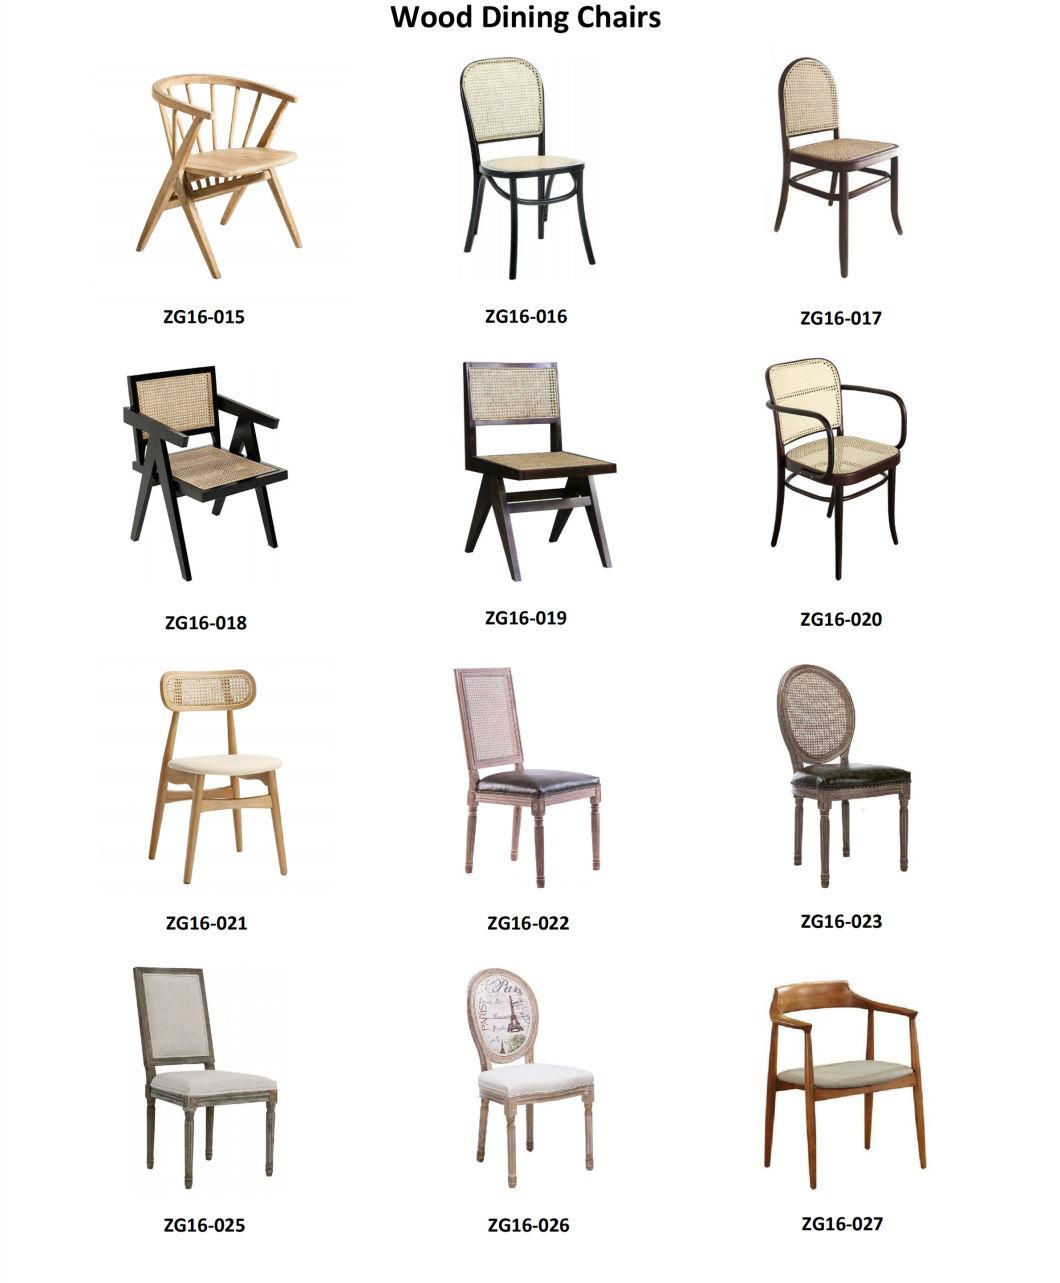 Hot Selling Wood Rattan Dining Chair (ZG16-019)